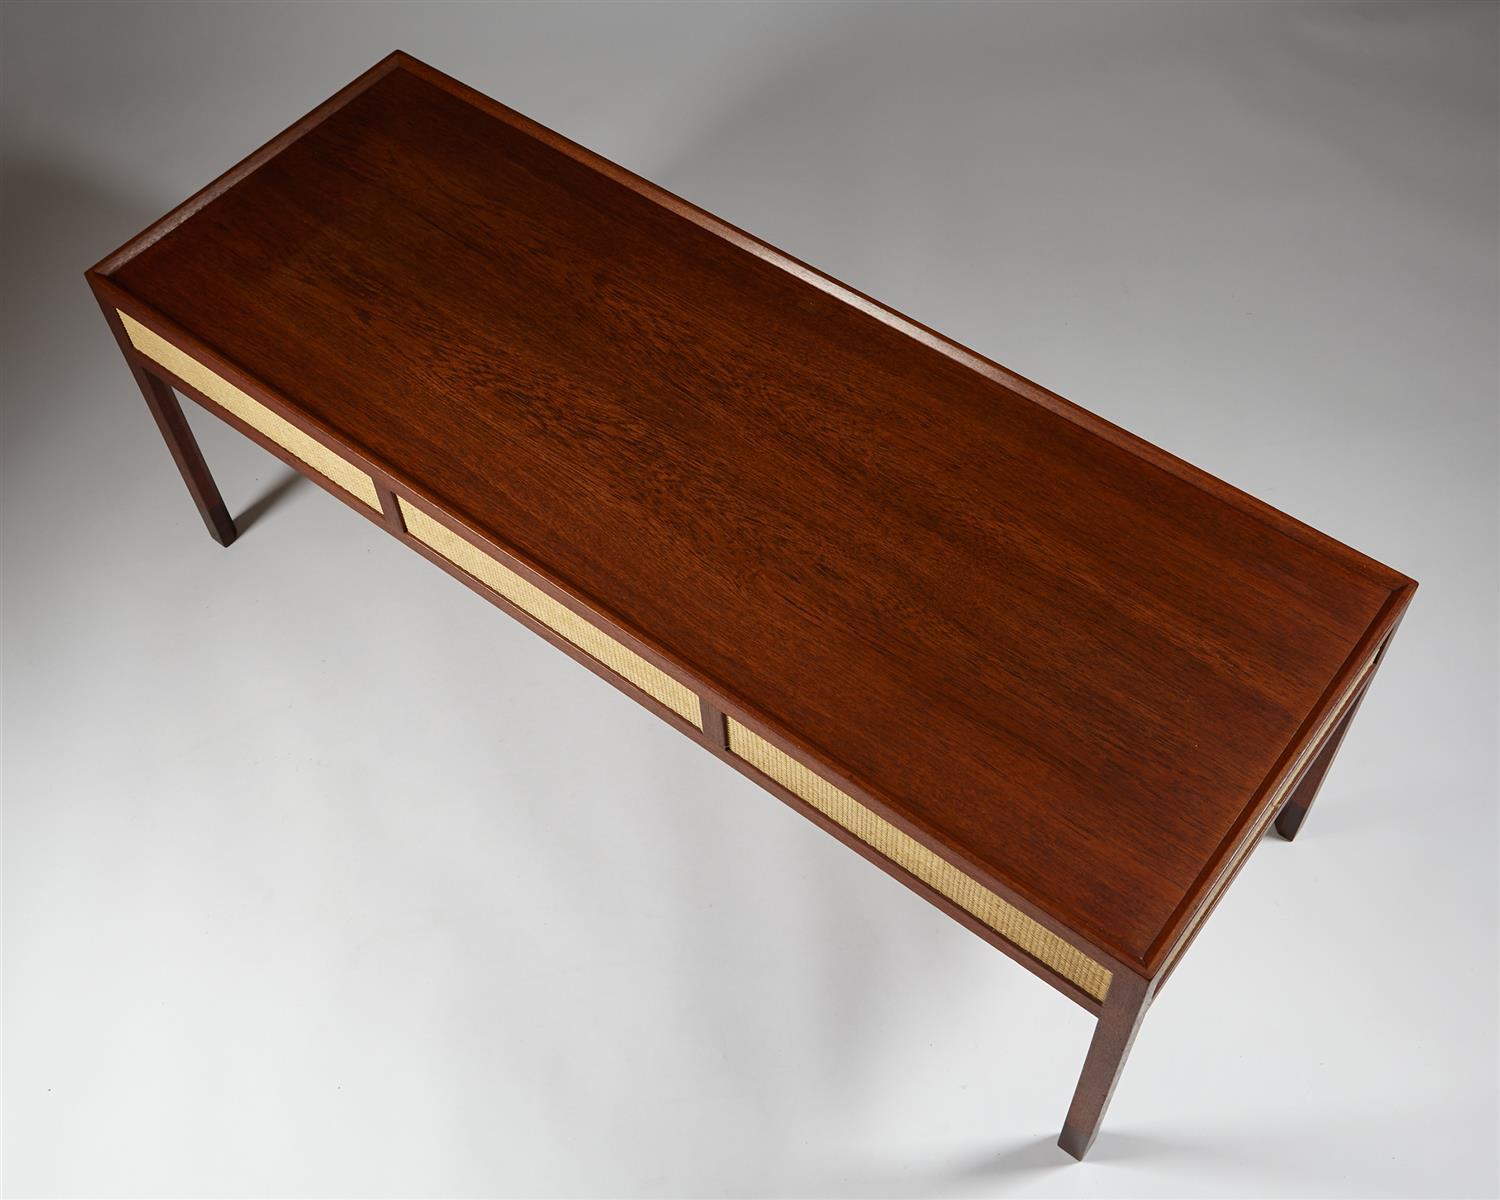 Mid-20th Century Occasional Table Designed by Mogens Lassen for T. Madsen, Denmark, 1953